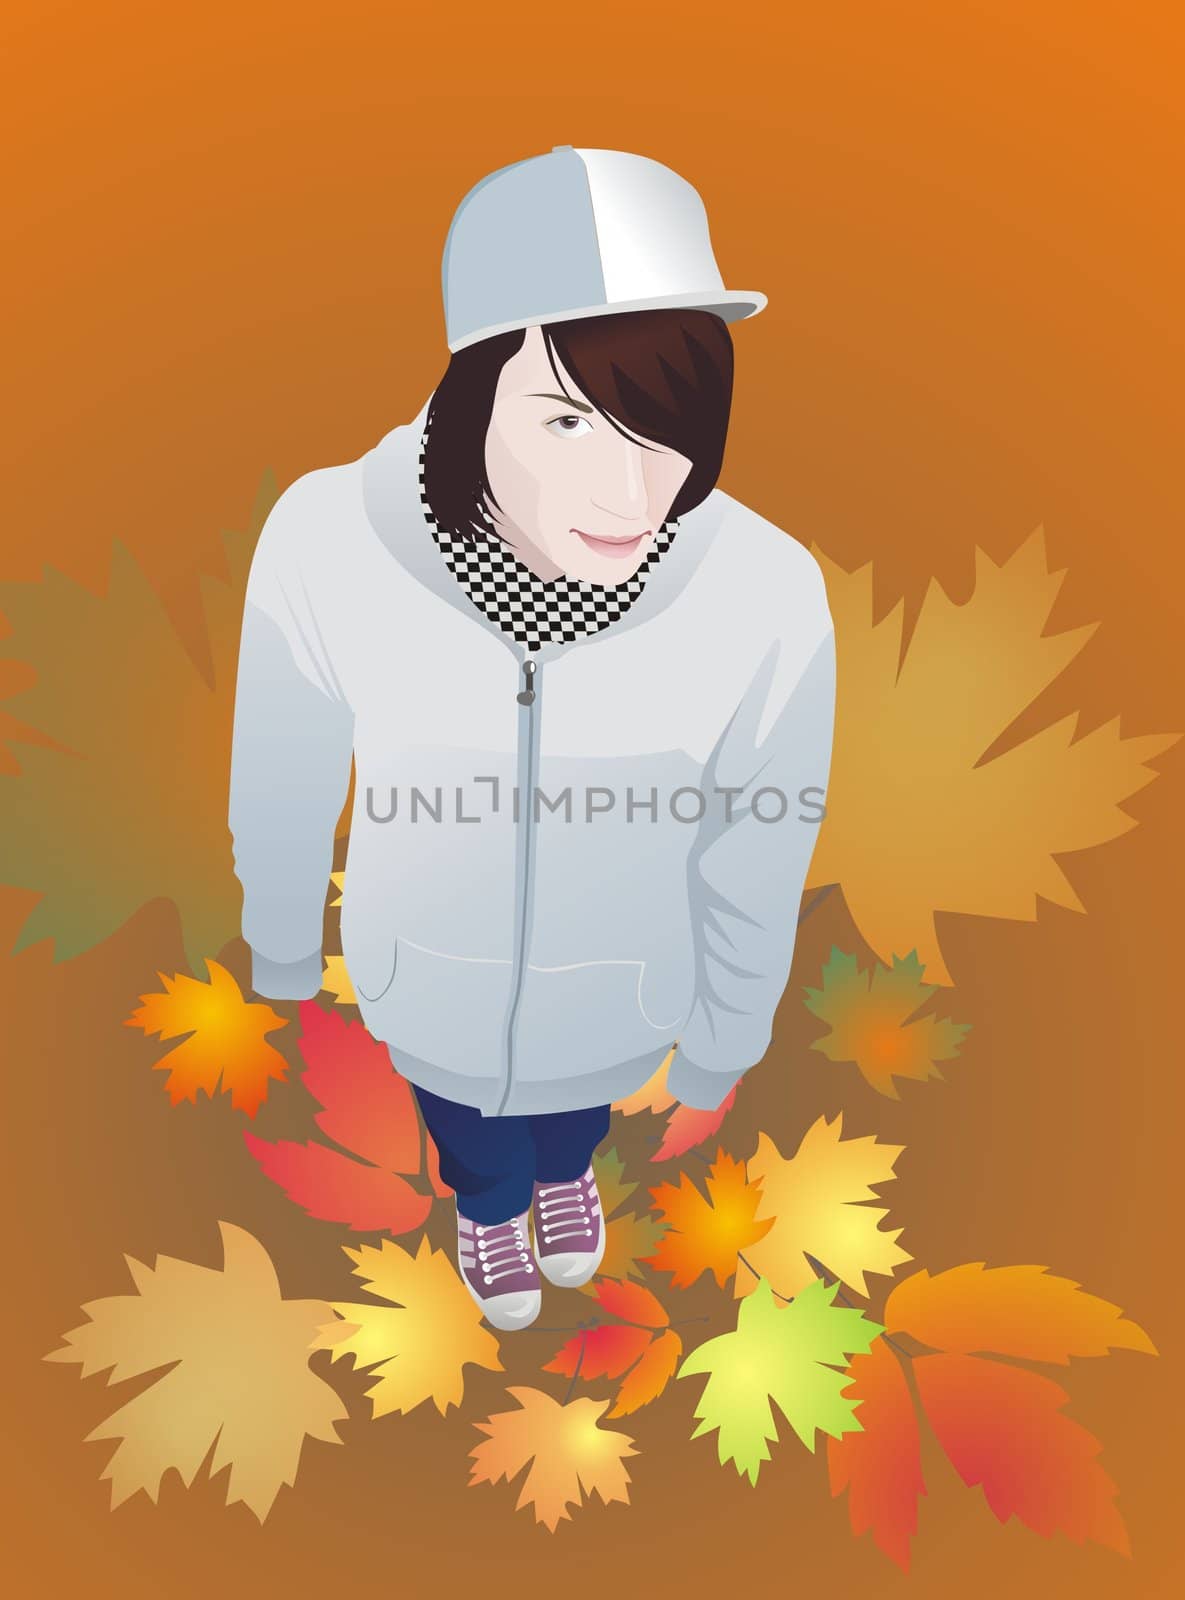 Drawing a teen boy in a cap and gumshoes, with long hair, autumn